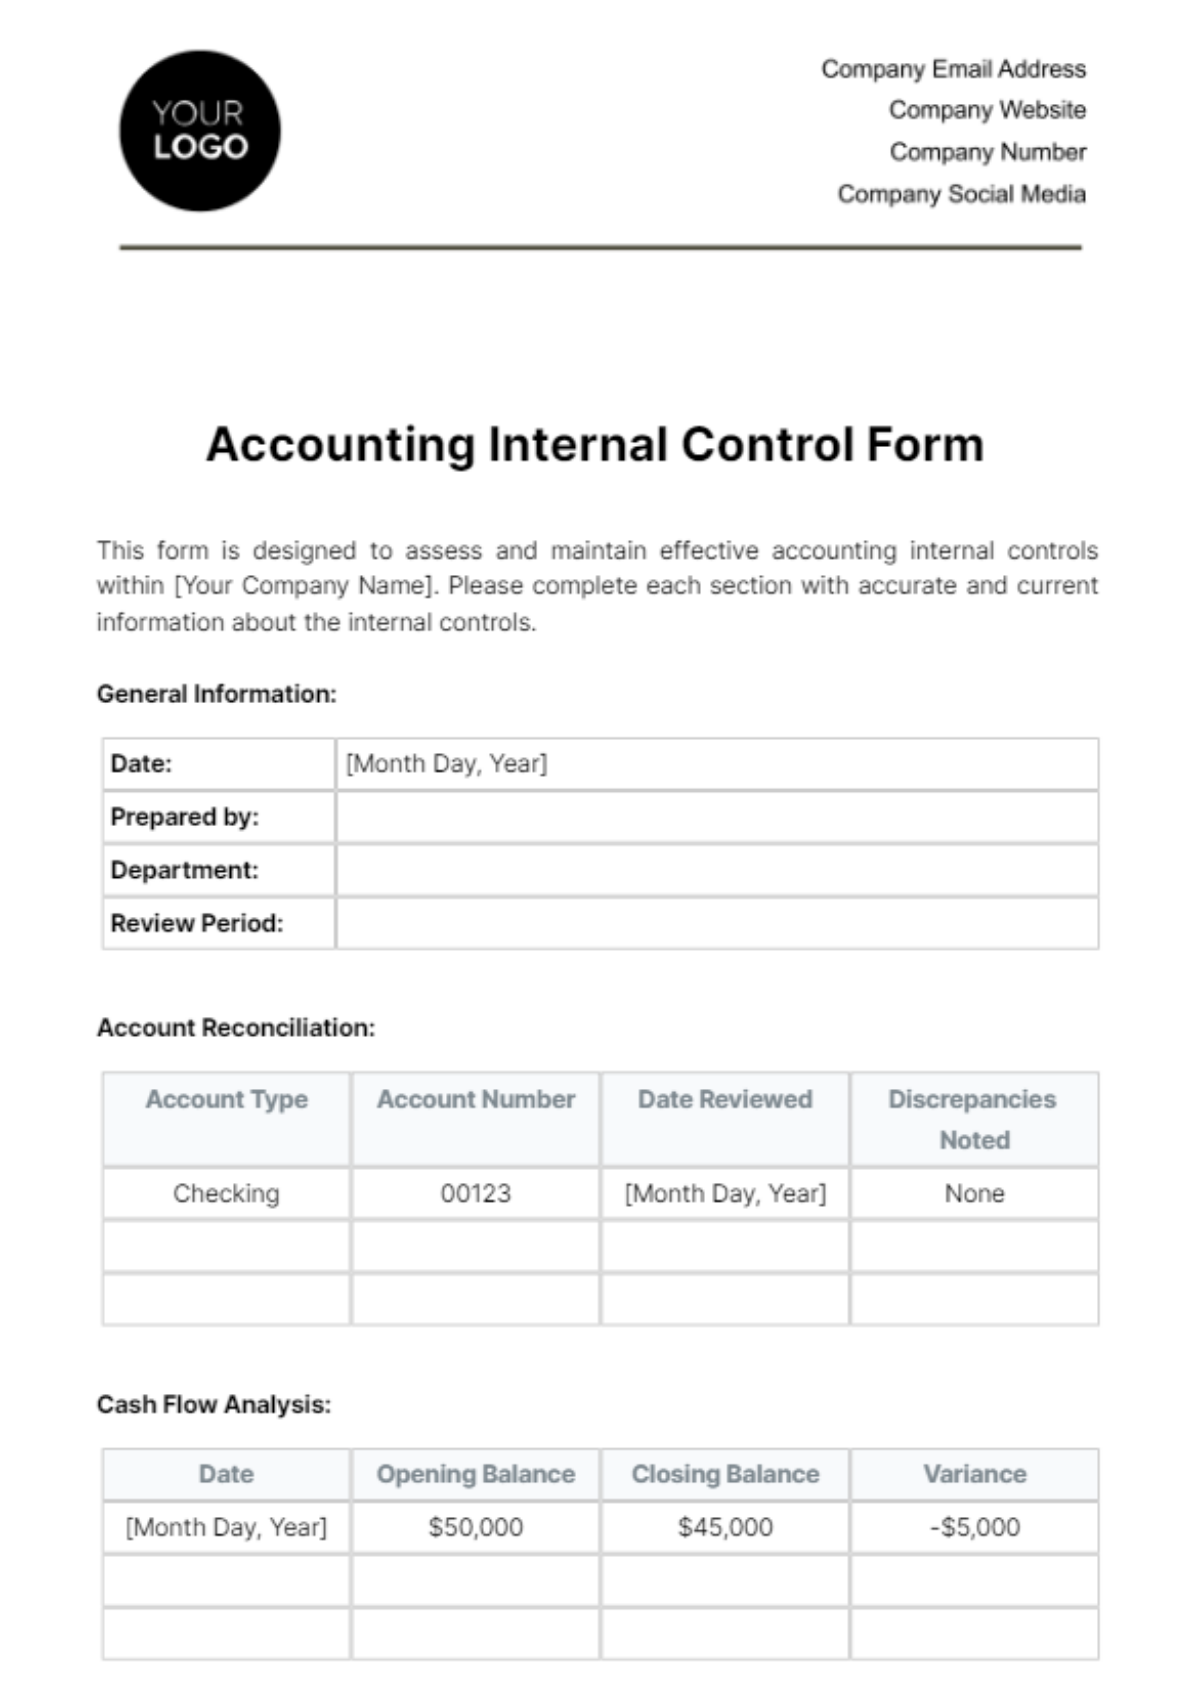 Accounting Internal Control Form Template